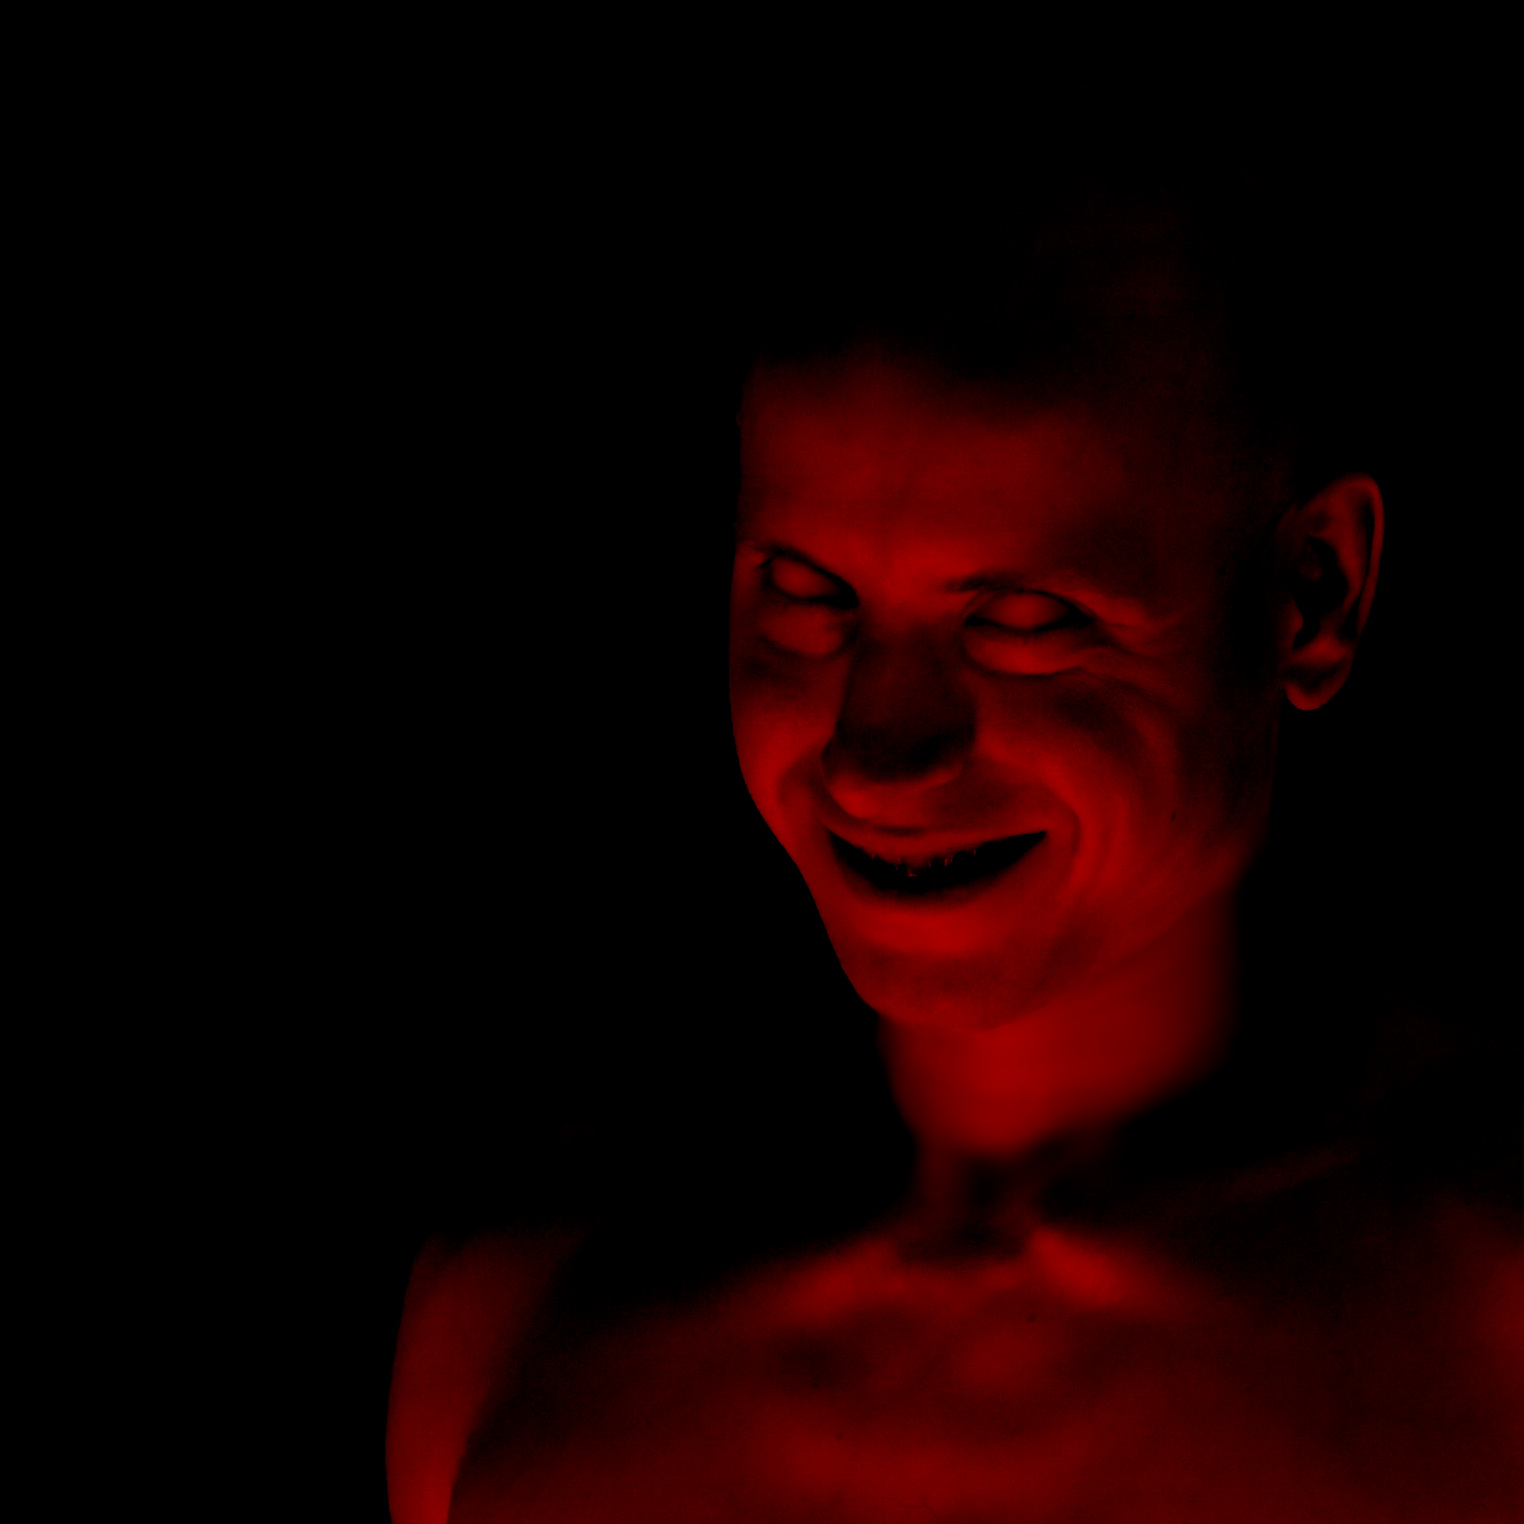 a man smiles in a dark po with red light